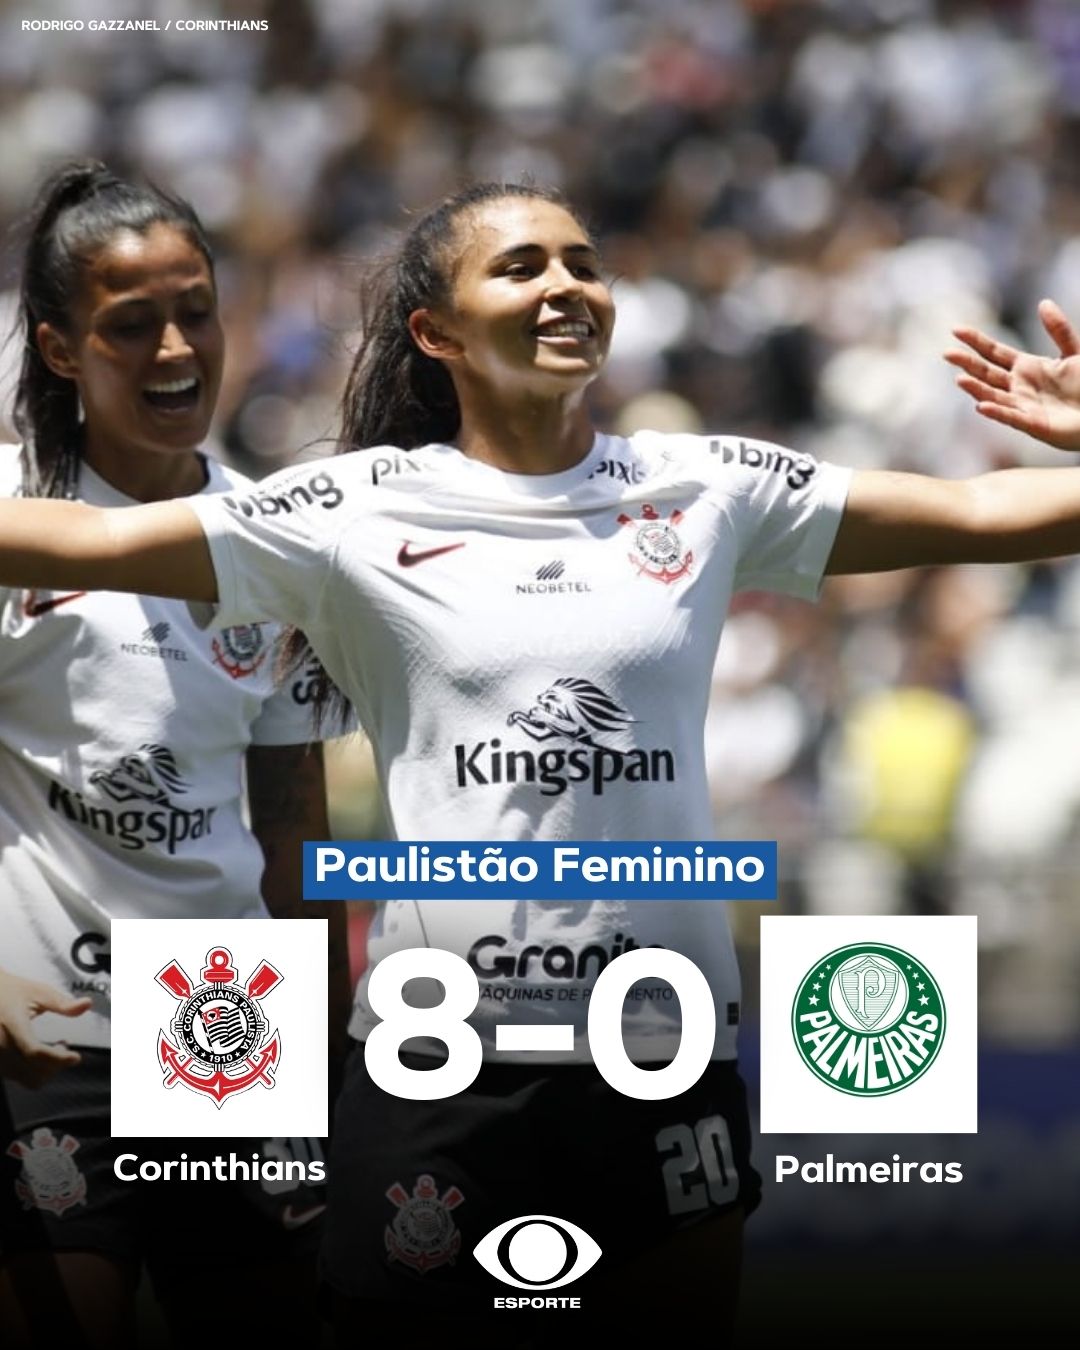 Corinthians on top of the world